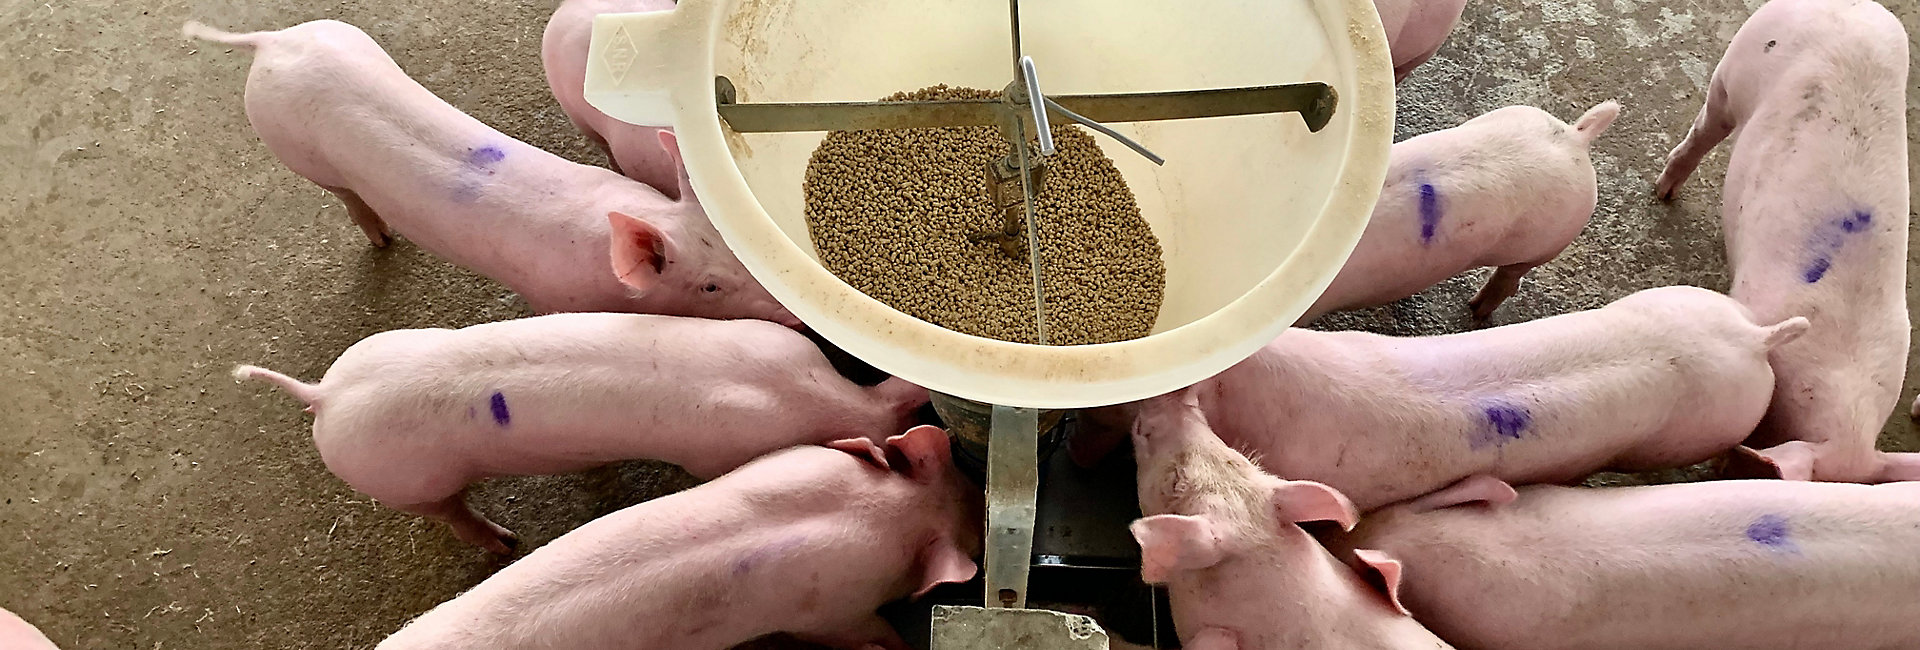 1381041629 The fattening pig group eating by the feeding machine in modern commercial farm, happy pig